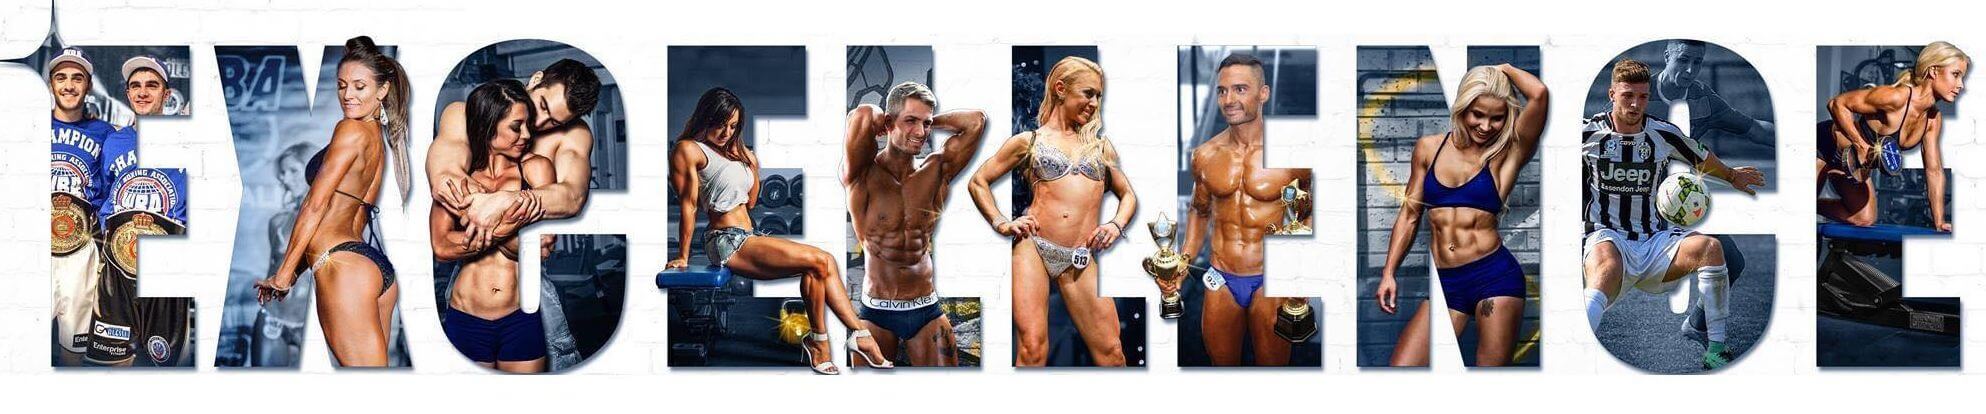 Excellence Personal Training Gym Richmond Melbourne